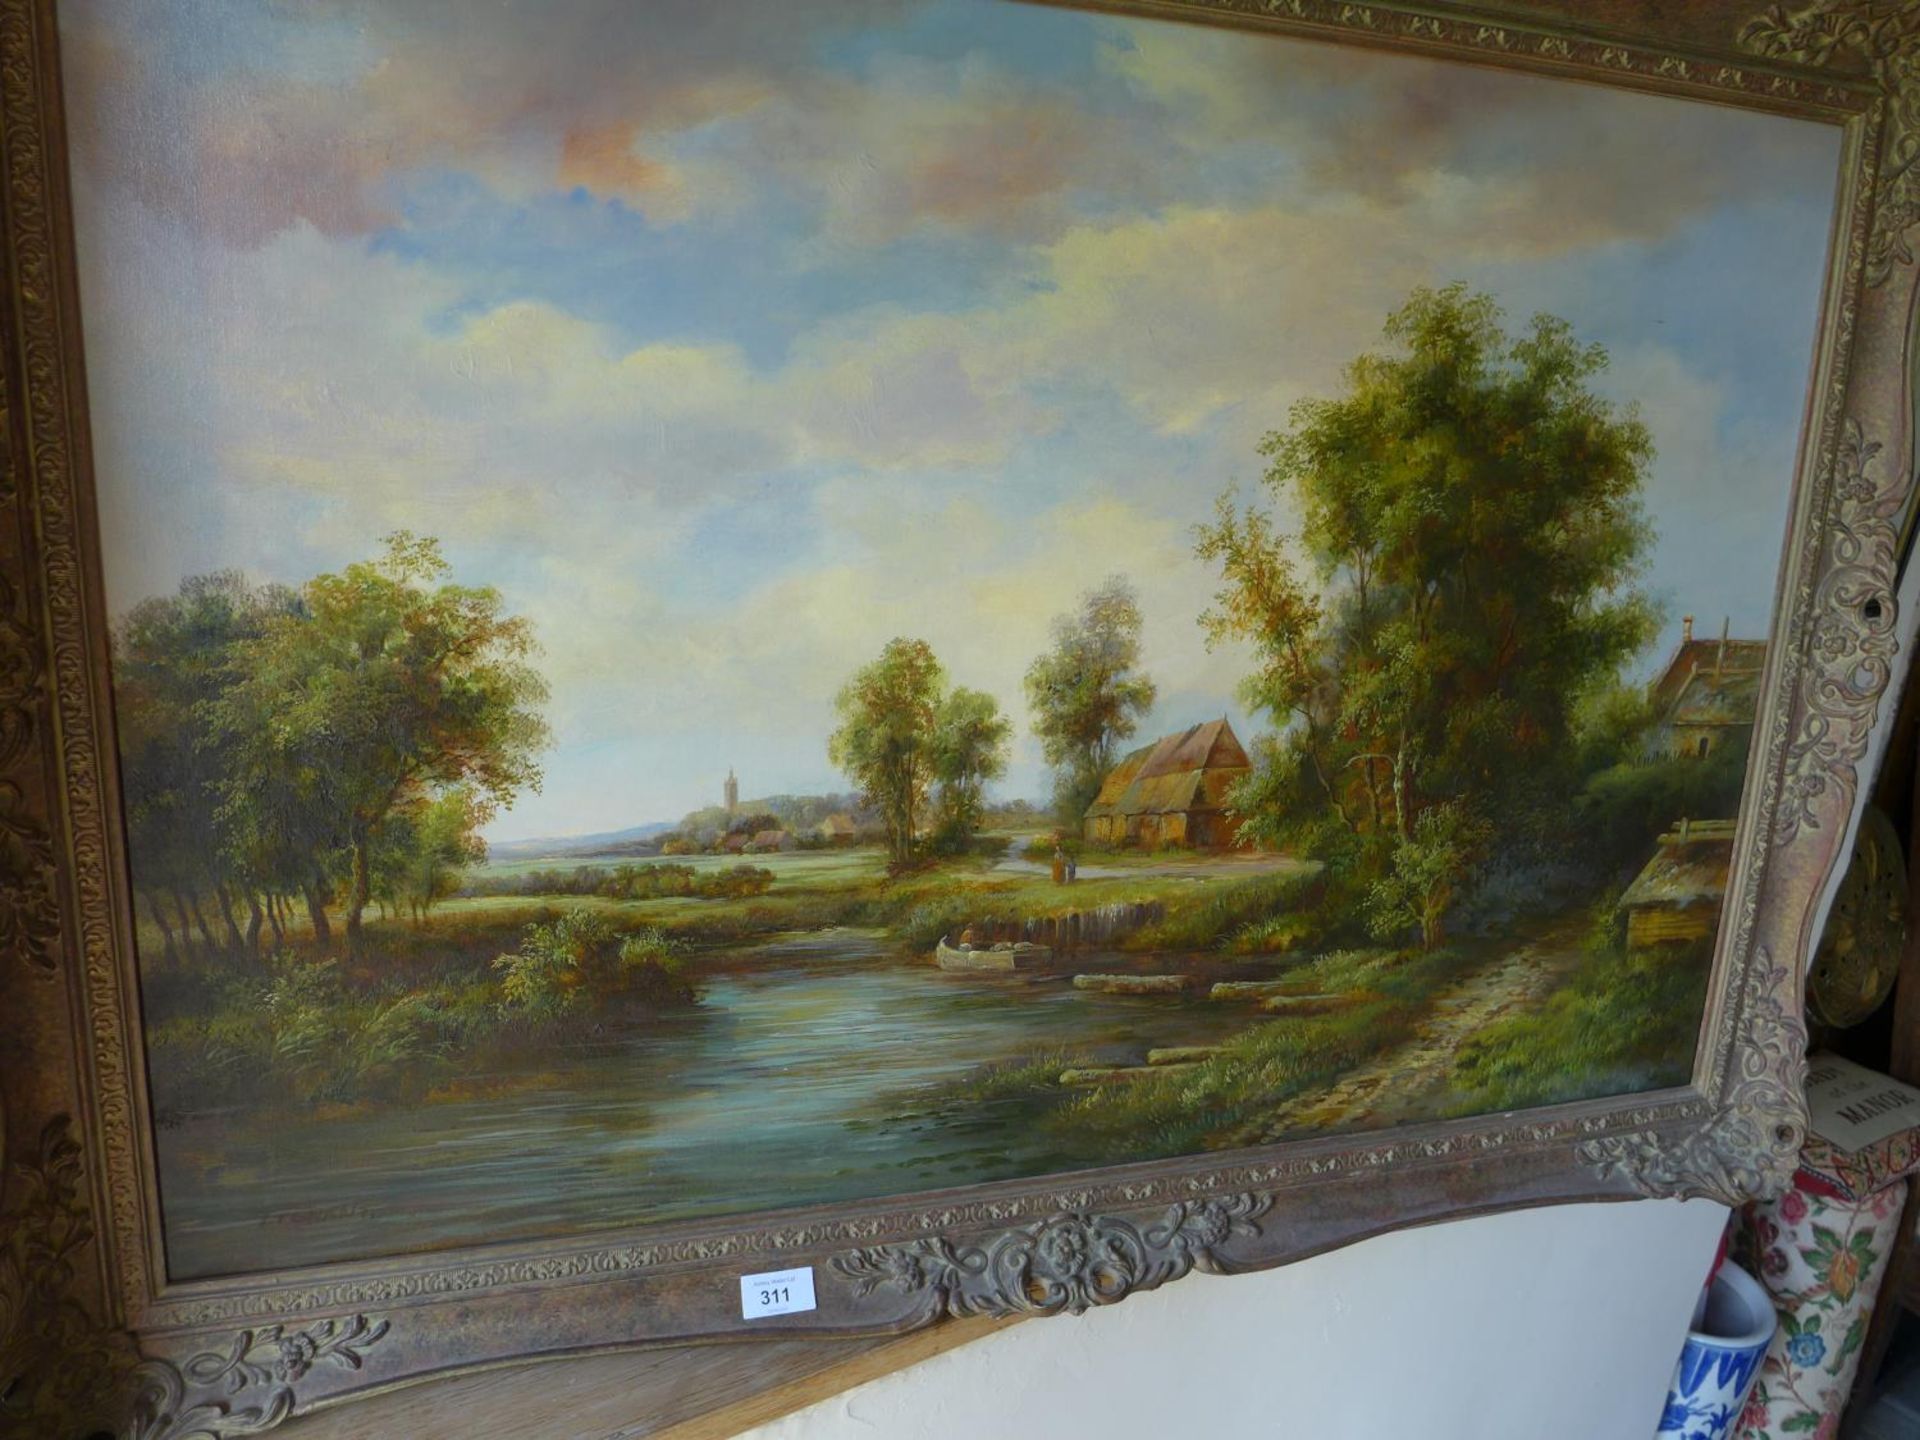 F TENANT (20TH CENTURY), LAKE SCENE WITH FIGURES AND COTTAGE, OIL ON CANVAS, SIGNED, 60X90CM, IN - Image 5 of 5